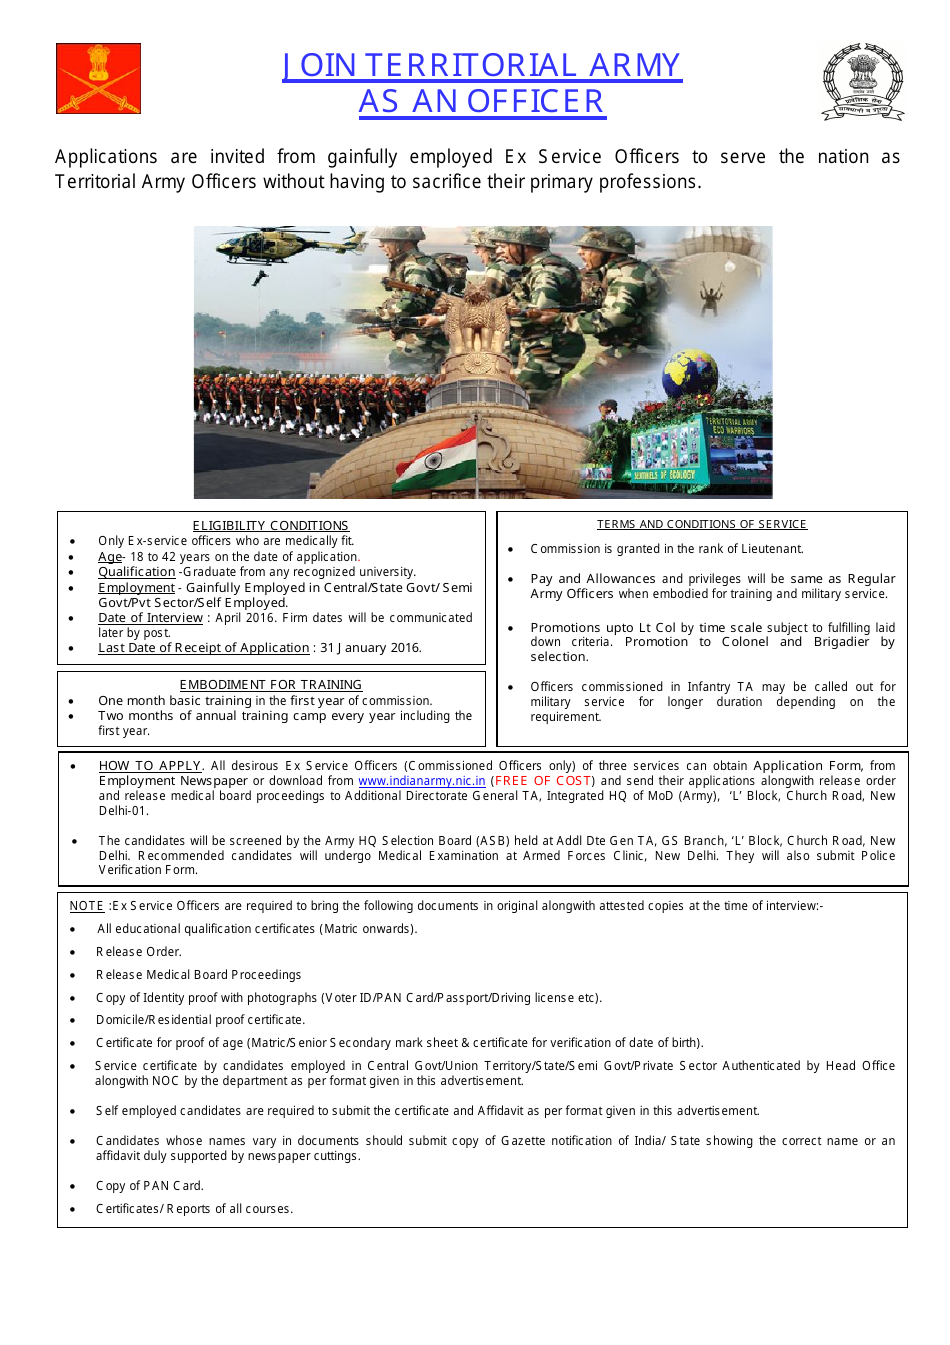 Application Form for Commission in the Territorial Army for Non Dept (Inf) Ta - India, Page 1